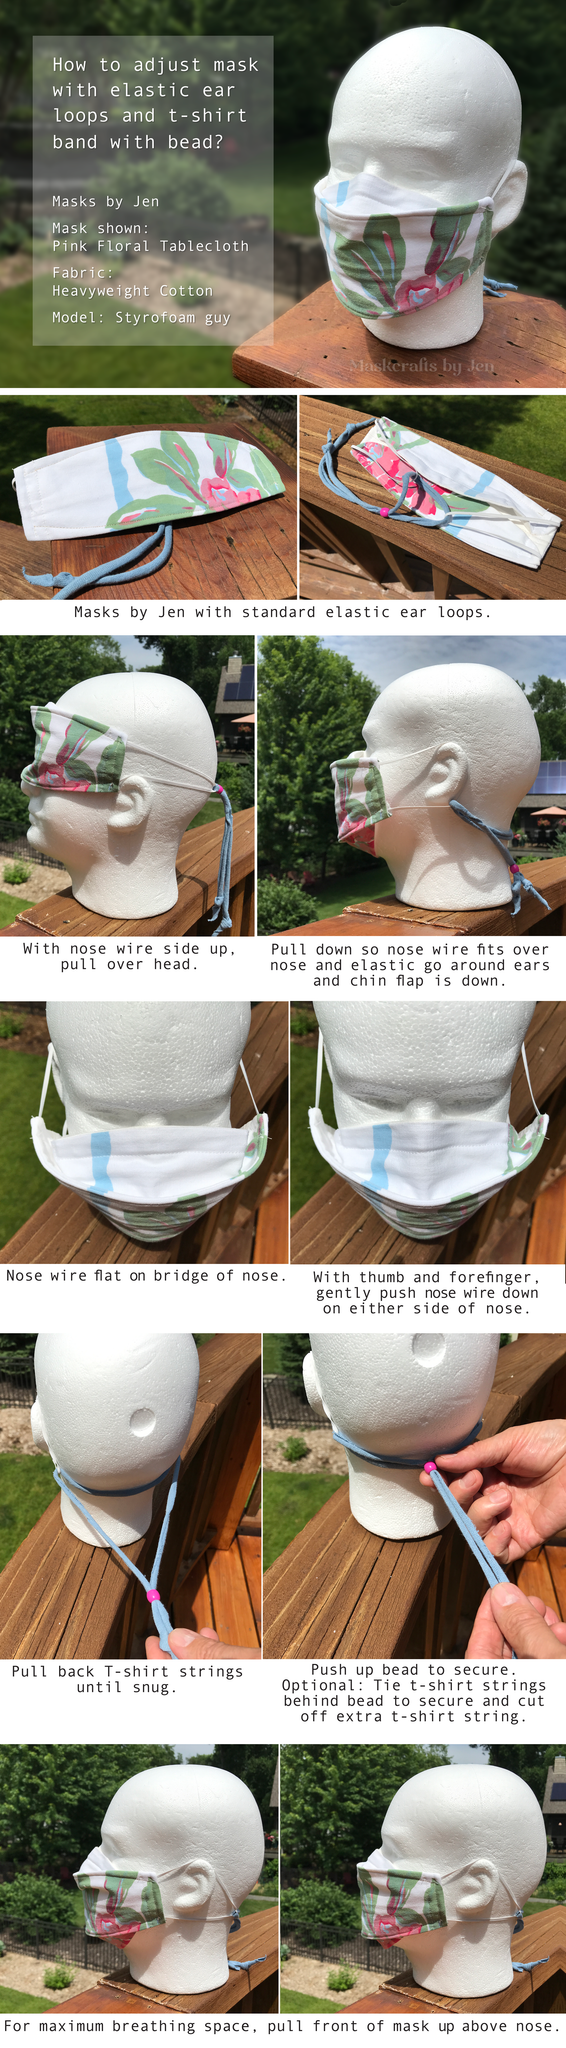 How to adjust mask by jen with elastic ear loops and t-shirt band and bead